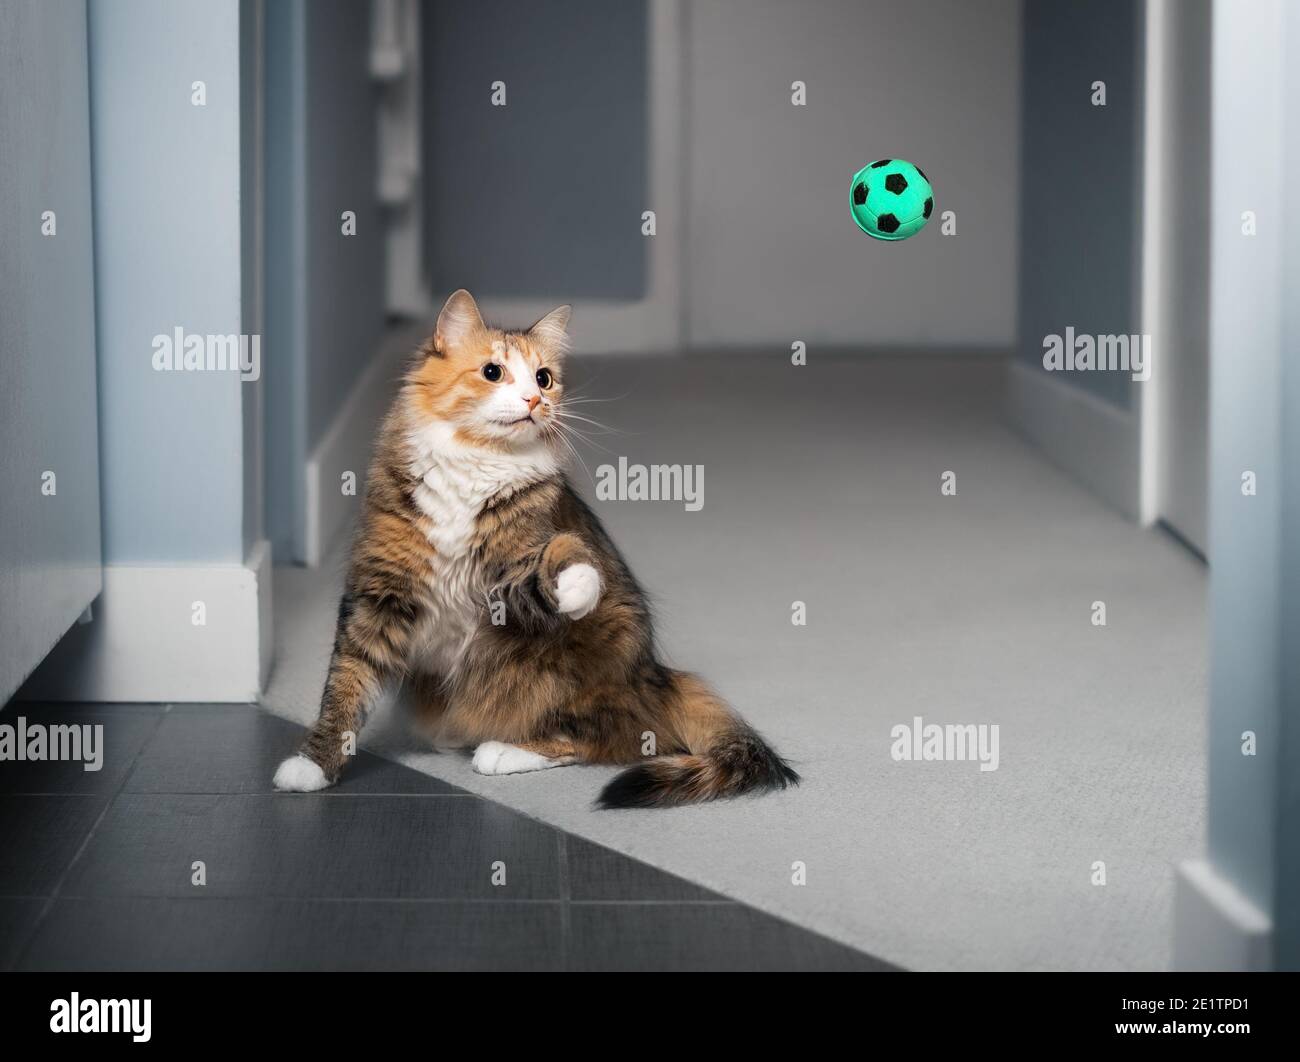 Cat playing fetch with ball. Cat in motion with paw raised, ready to catch the ball in the air. Concept for mental and physical stimulation for pets o Stock Photo